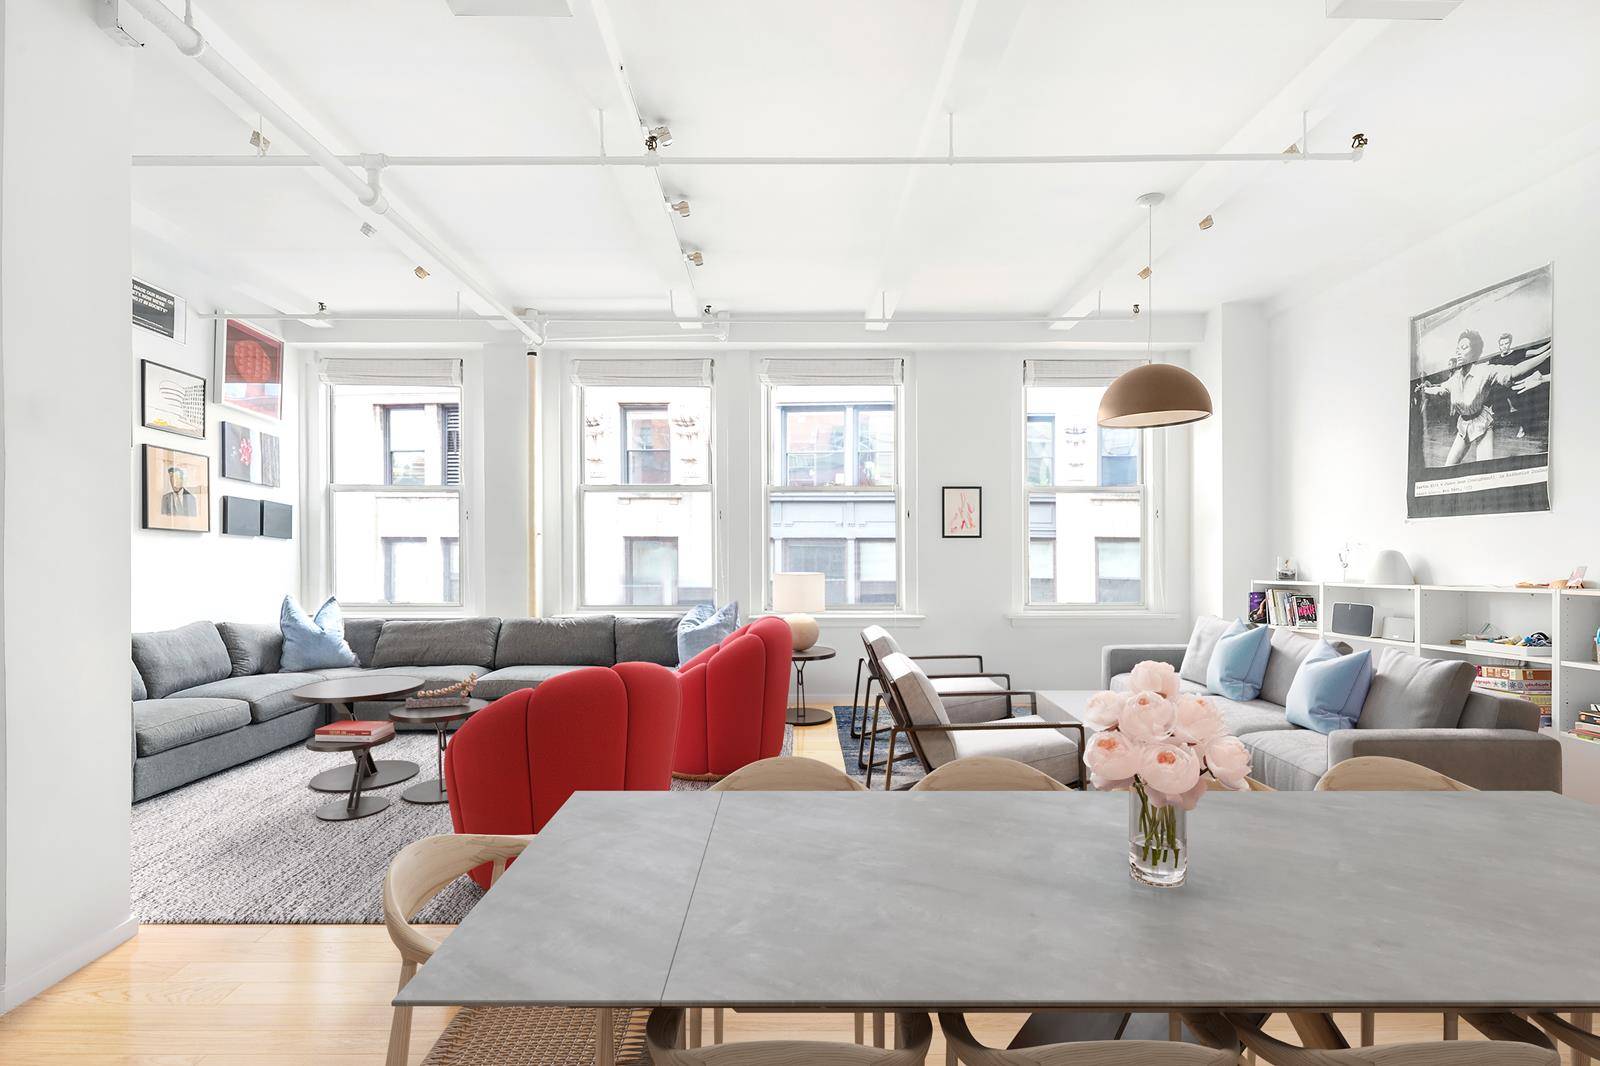 Light floods into this exceptional high floor Chelsea renovated loft from six south facing oversized windows.